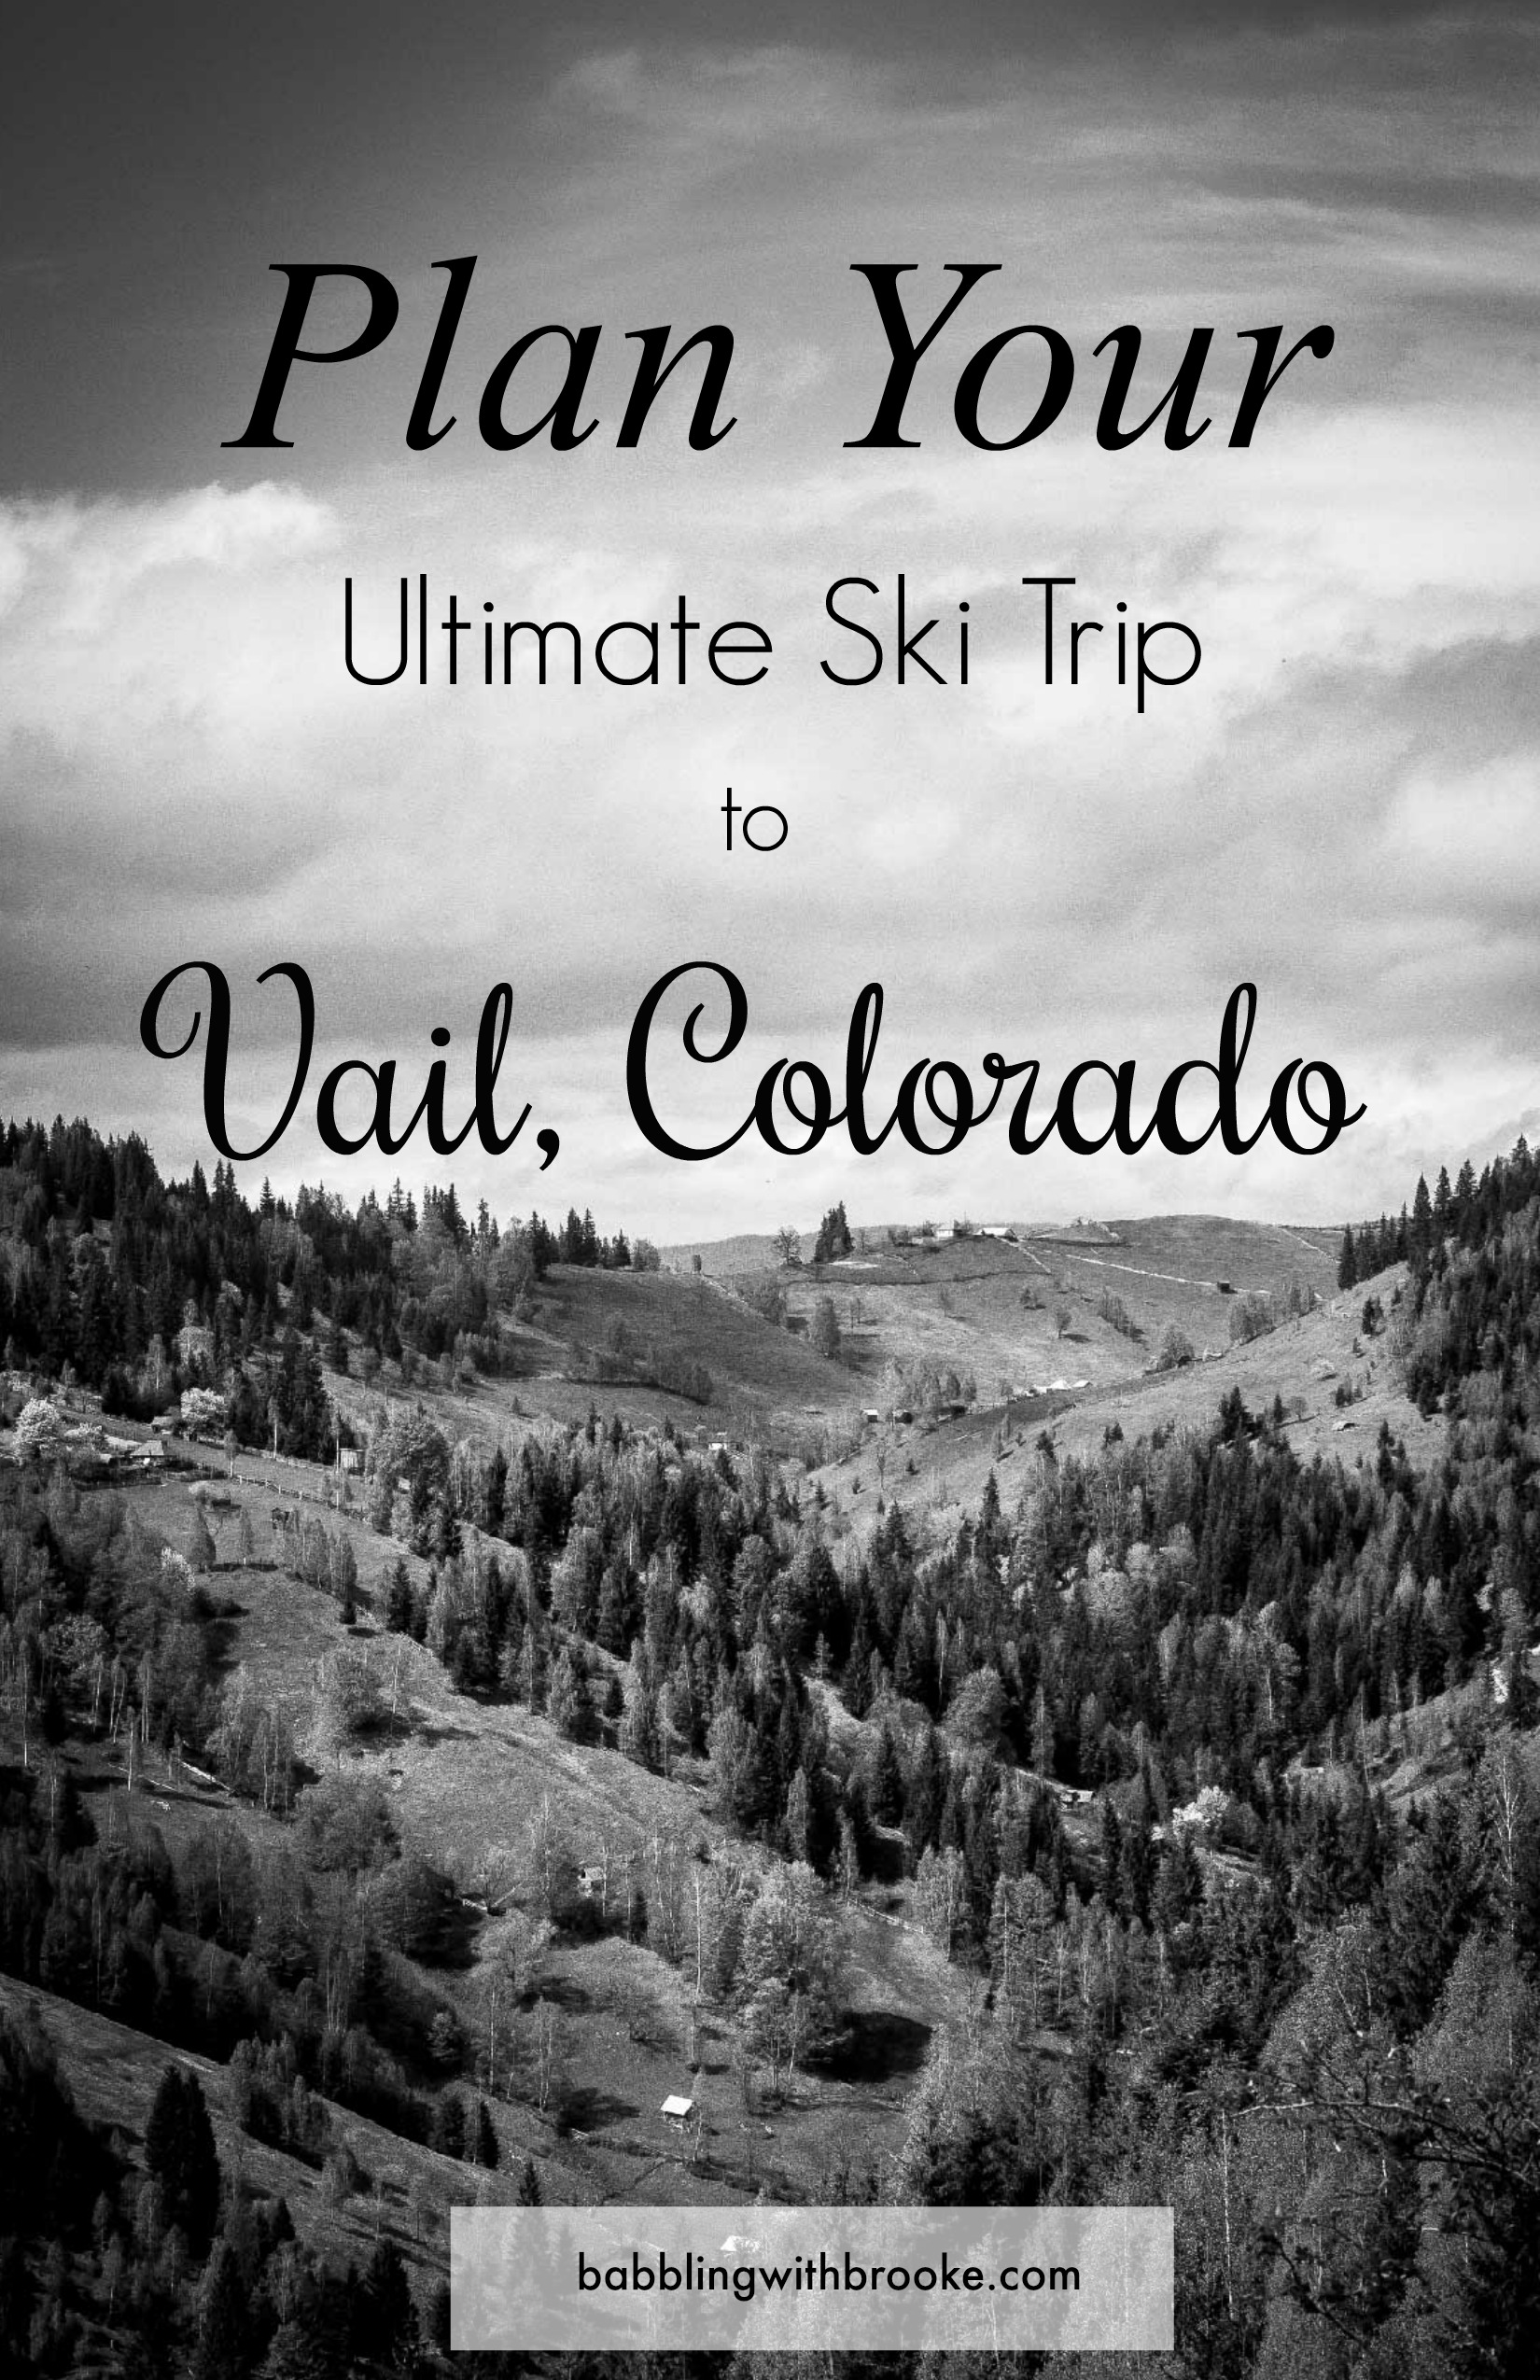 Planning your ski trip to Vail CO doesn't have to be hard! I have created the ultimate list of tips to your ultimate skiing vacation in Winter in Vail! #vail #skiitrip #winteriscoming #colorado